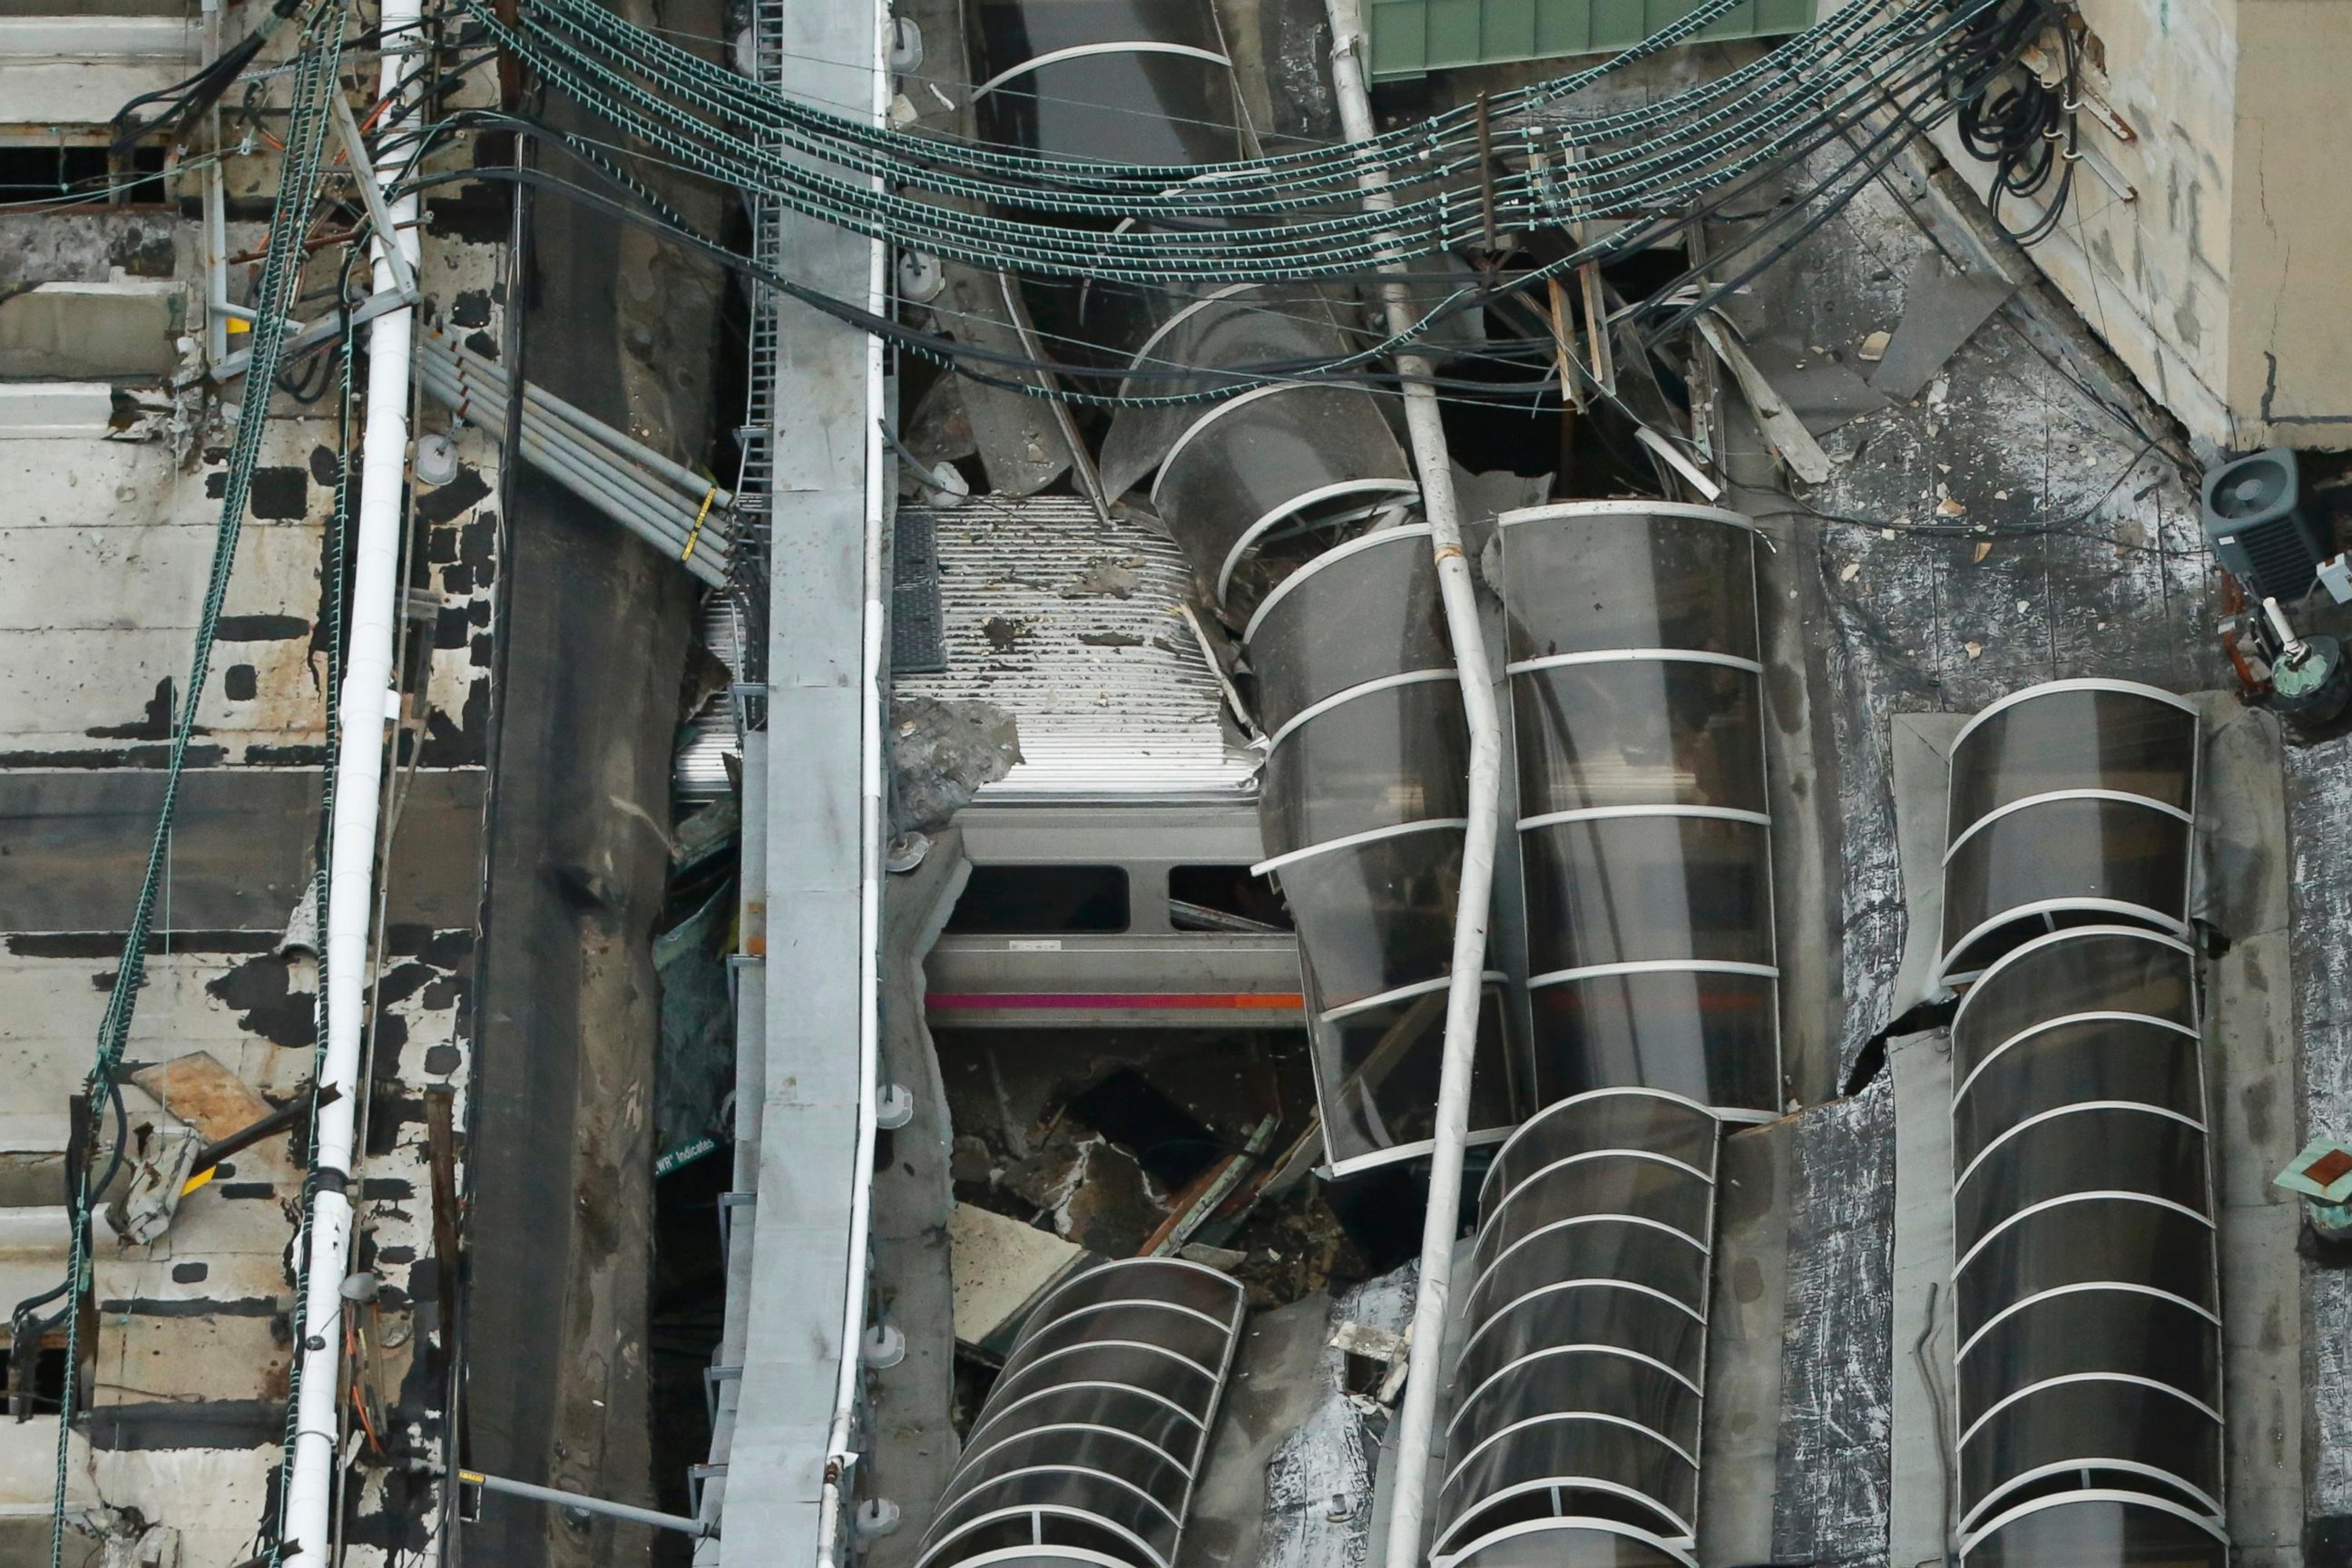 PHOTO: A derailed New Jersey Transit train is seen under a collapsed roof after it derailed and crashed into the station in Hoboken, New Jersey, Sept. 29, 2016.